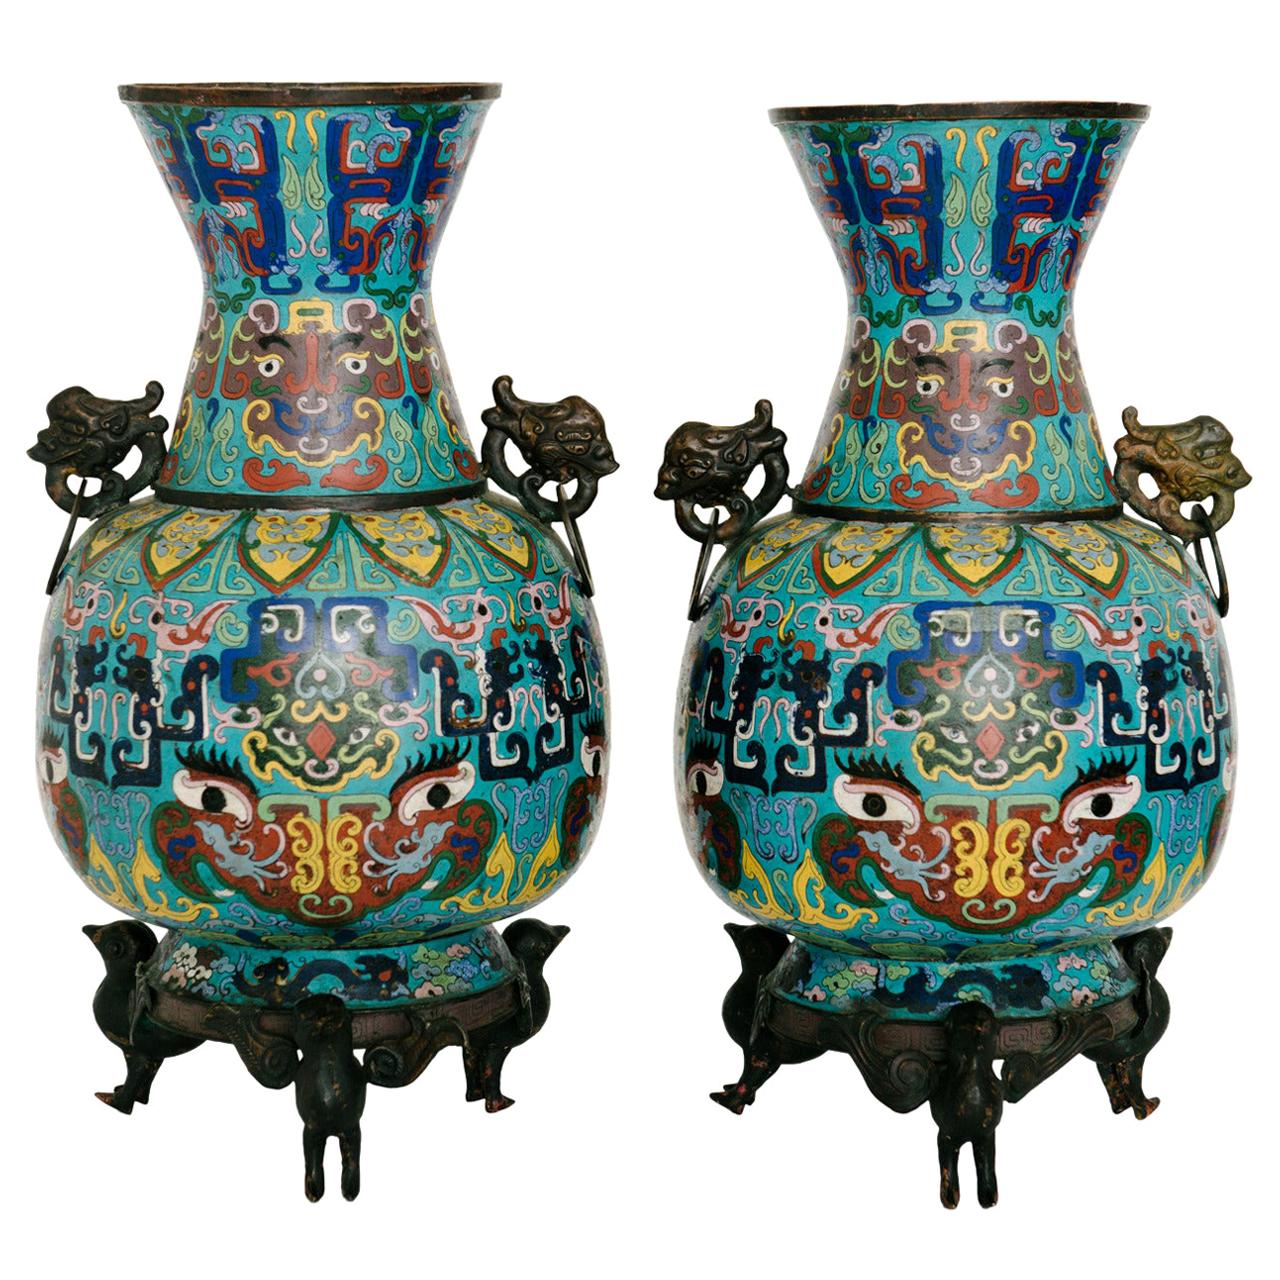 Pair of 19th Century Chinese Cloisonné Vases